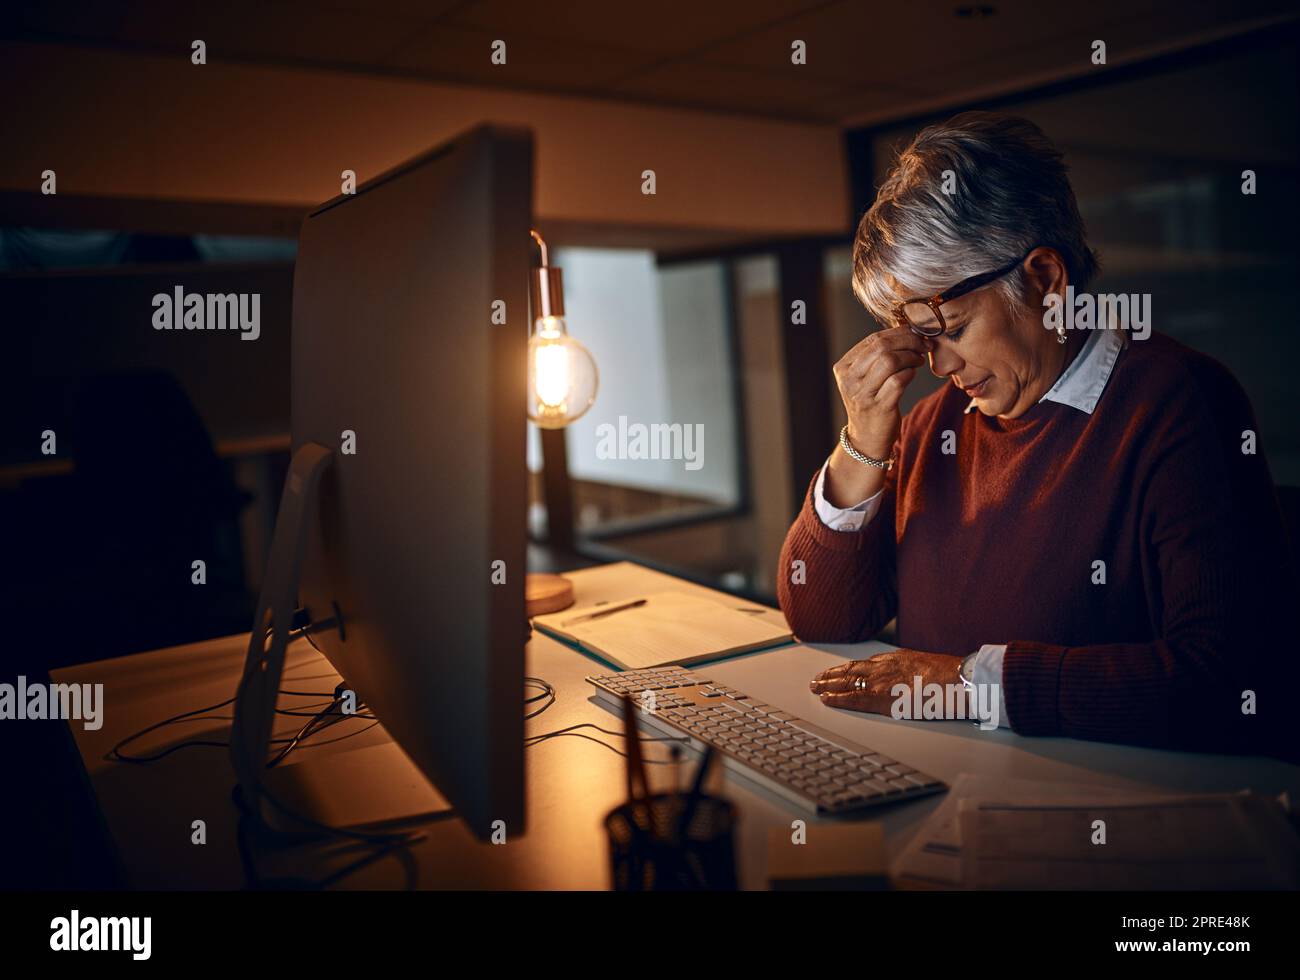 When the pressures of work become too unbearable. a mature businesswoman looking stressed out while working late in an office. Stock Photo